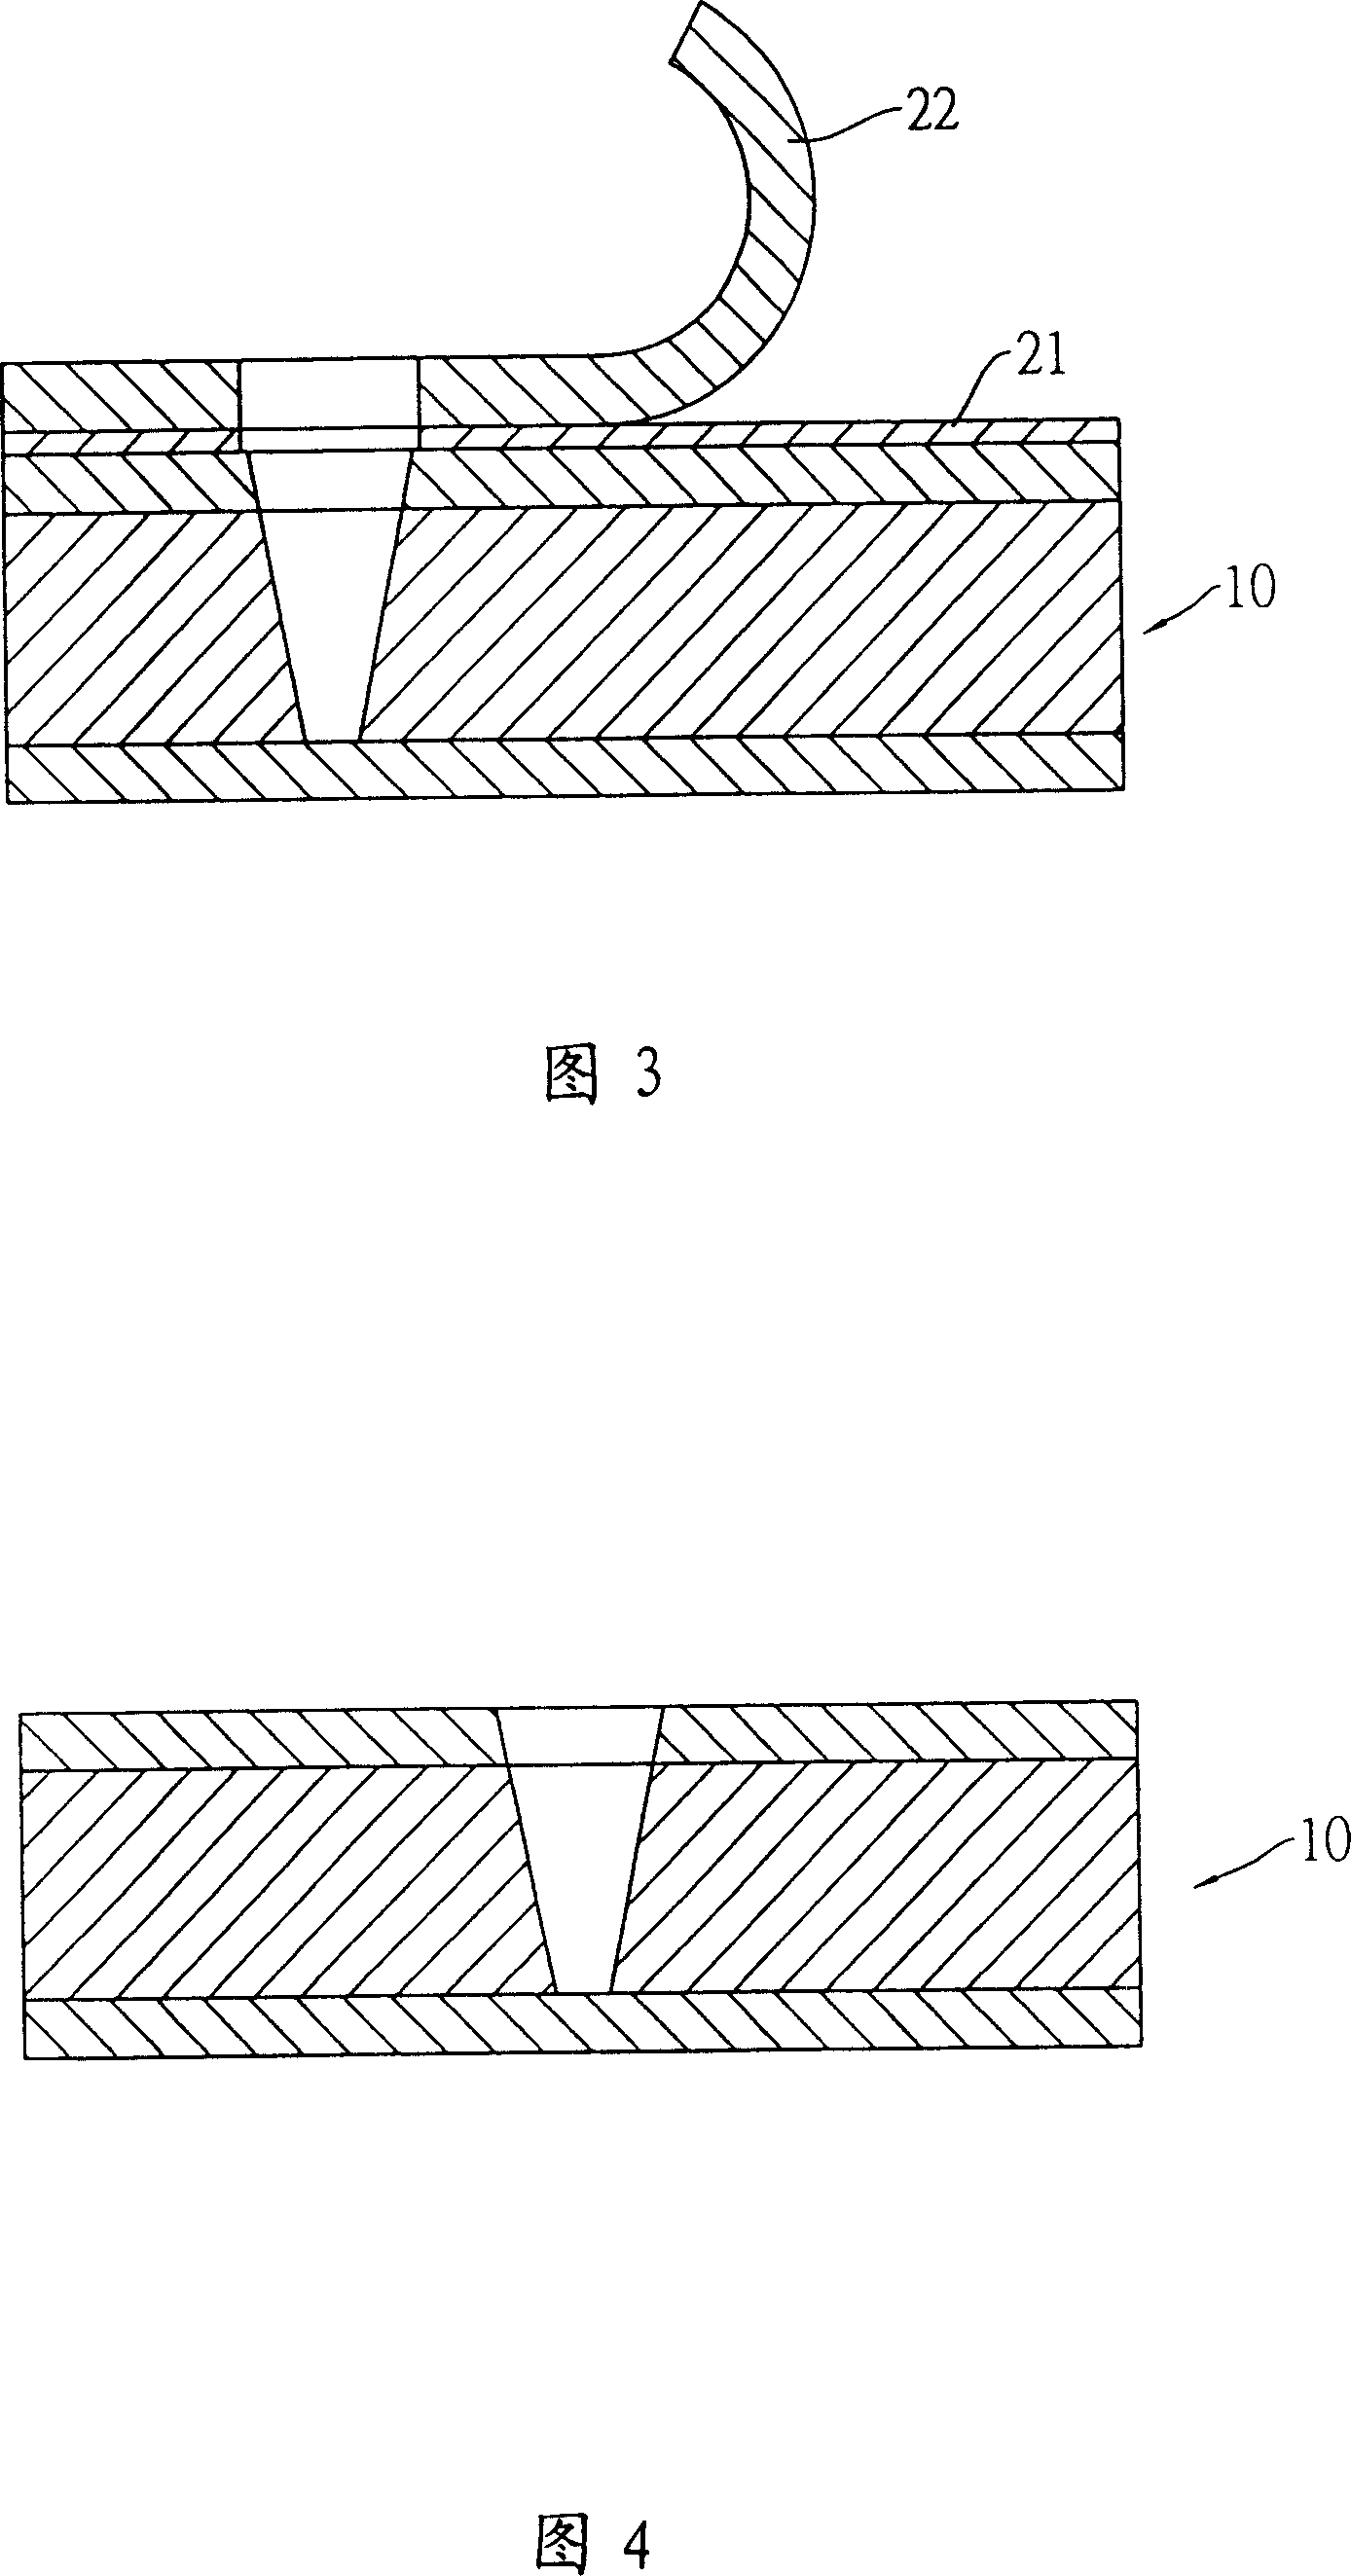 Residue removing method after circuit board laser drill processing